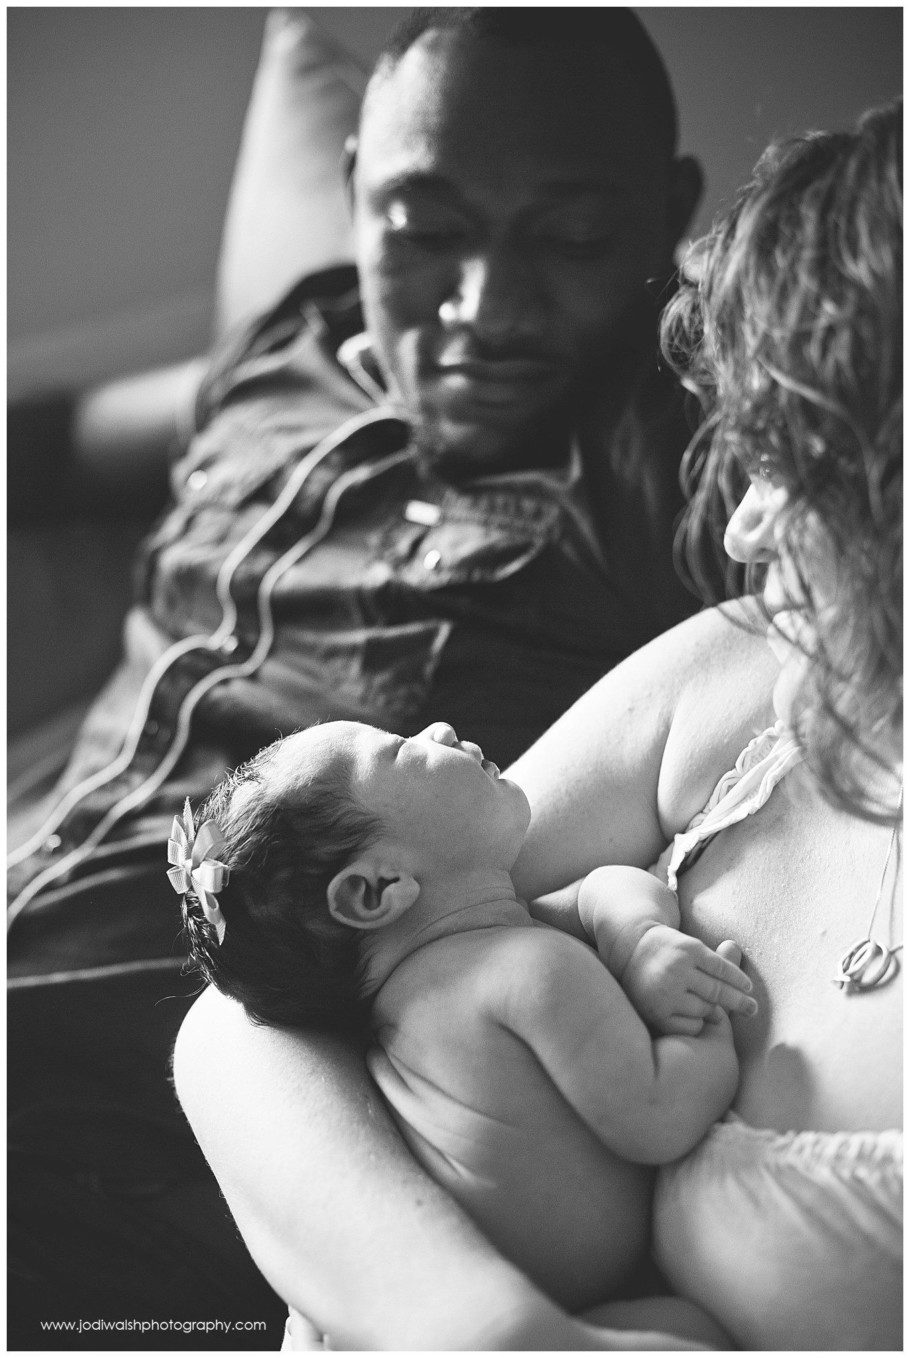 black and white image of a father and mother and newborn baby girl in their home. The dad is in the background looking intently down into his daughter's face as mom cradles her looking down too.